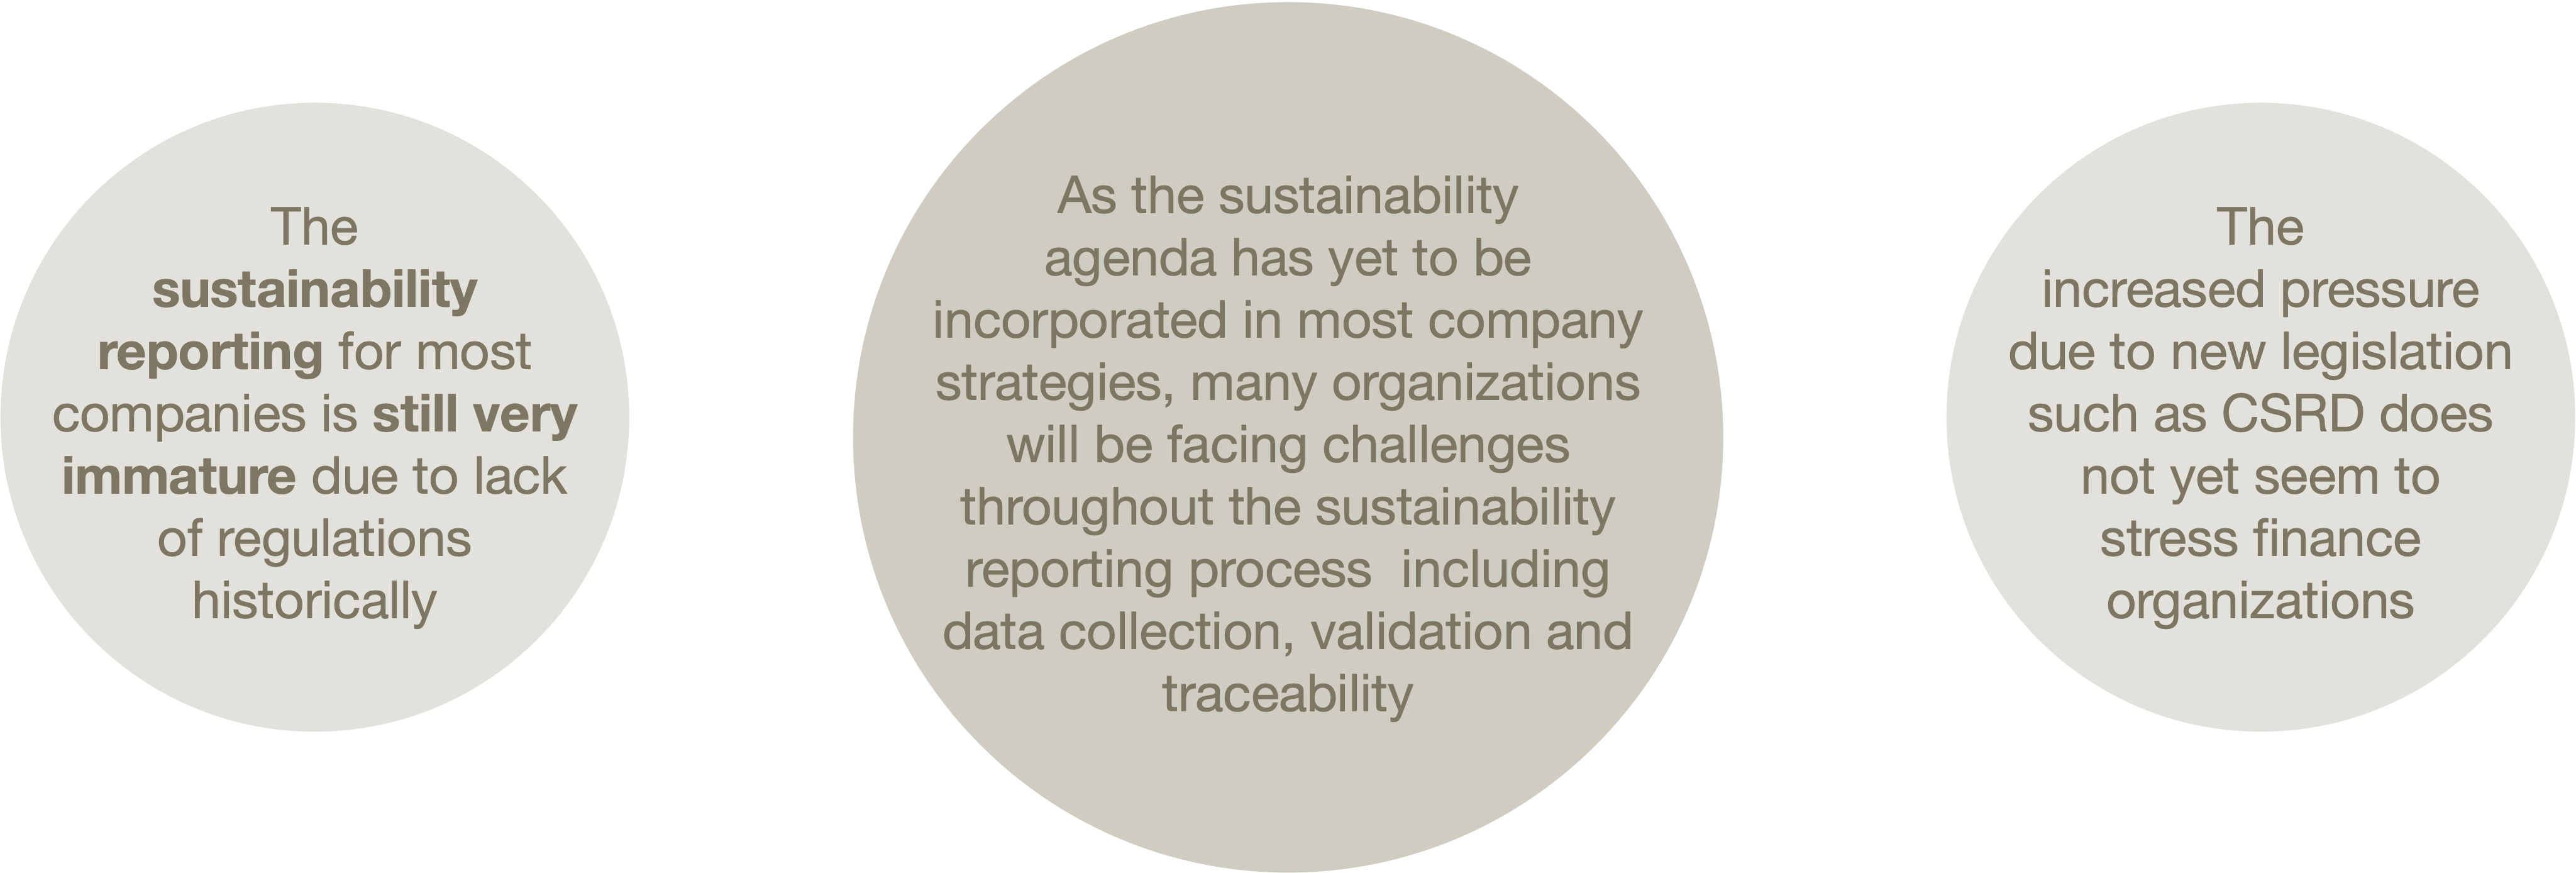 key findings_sustainability_CSRD_knowit